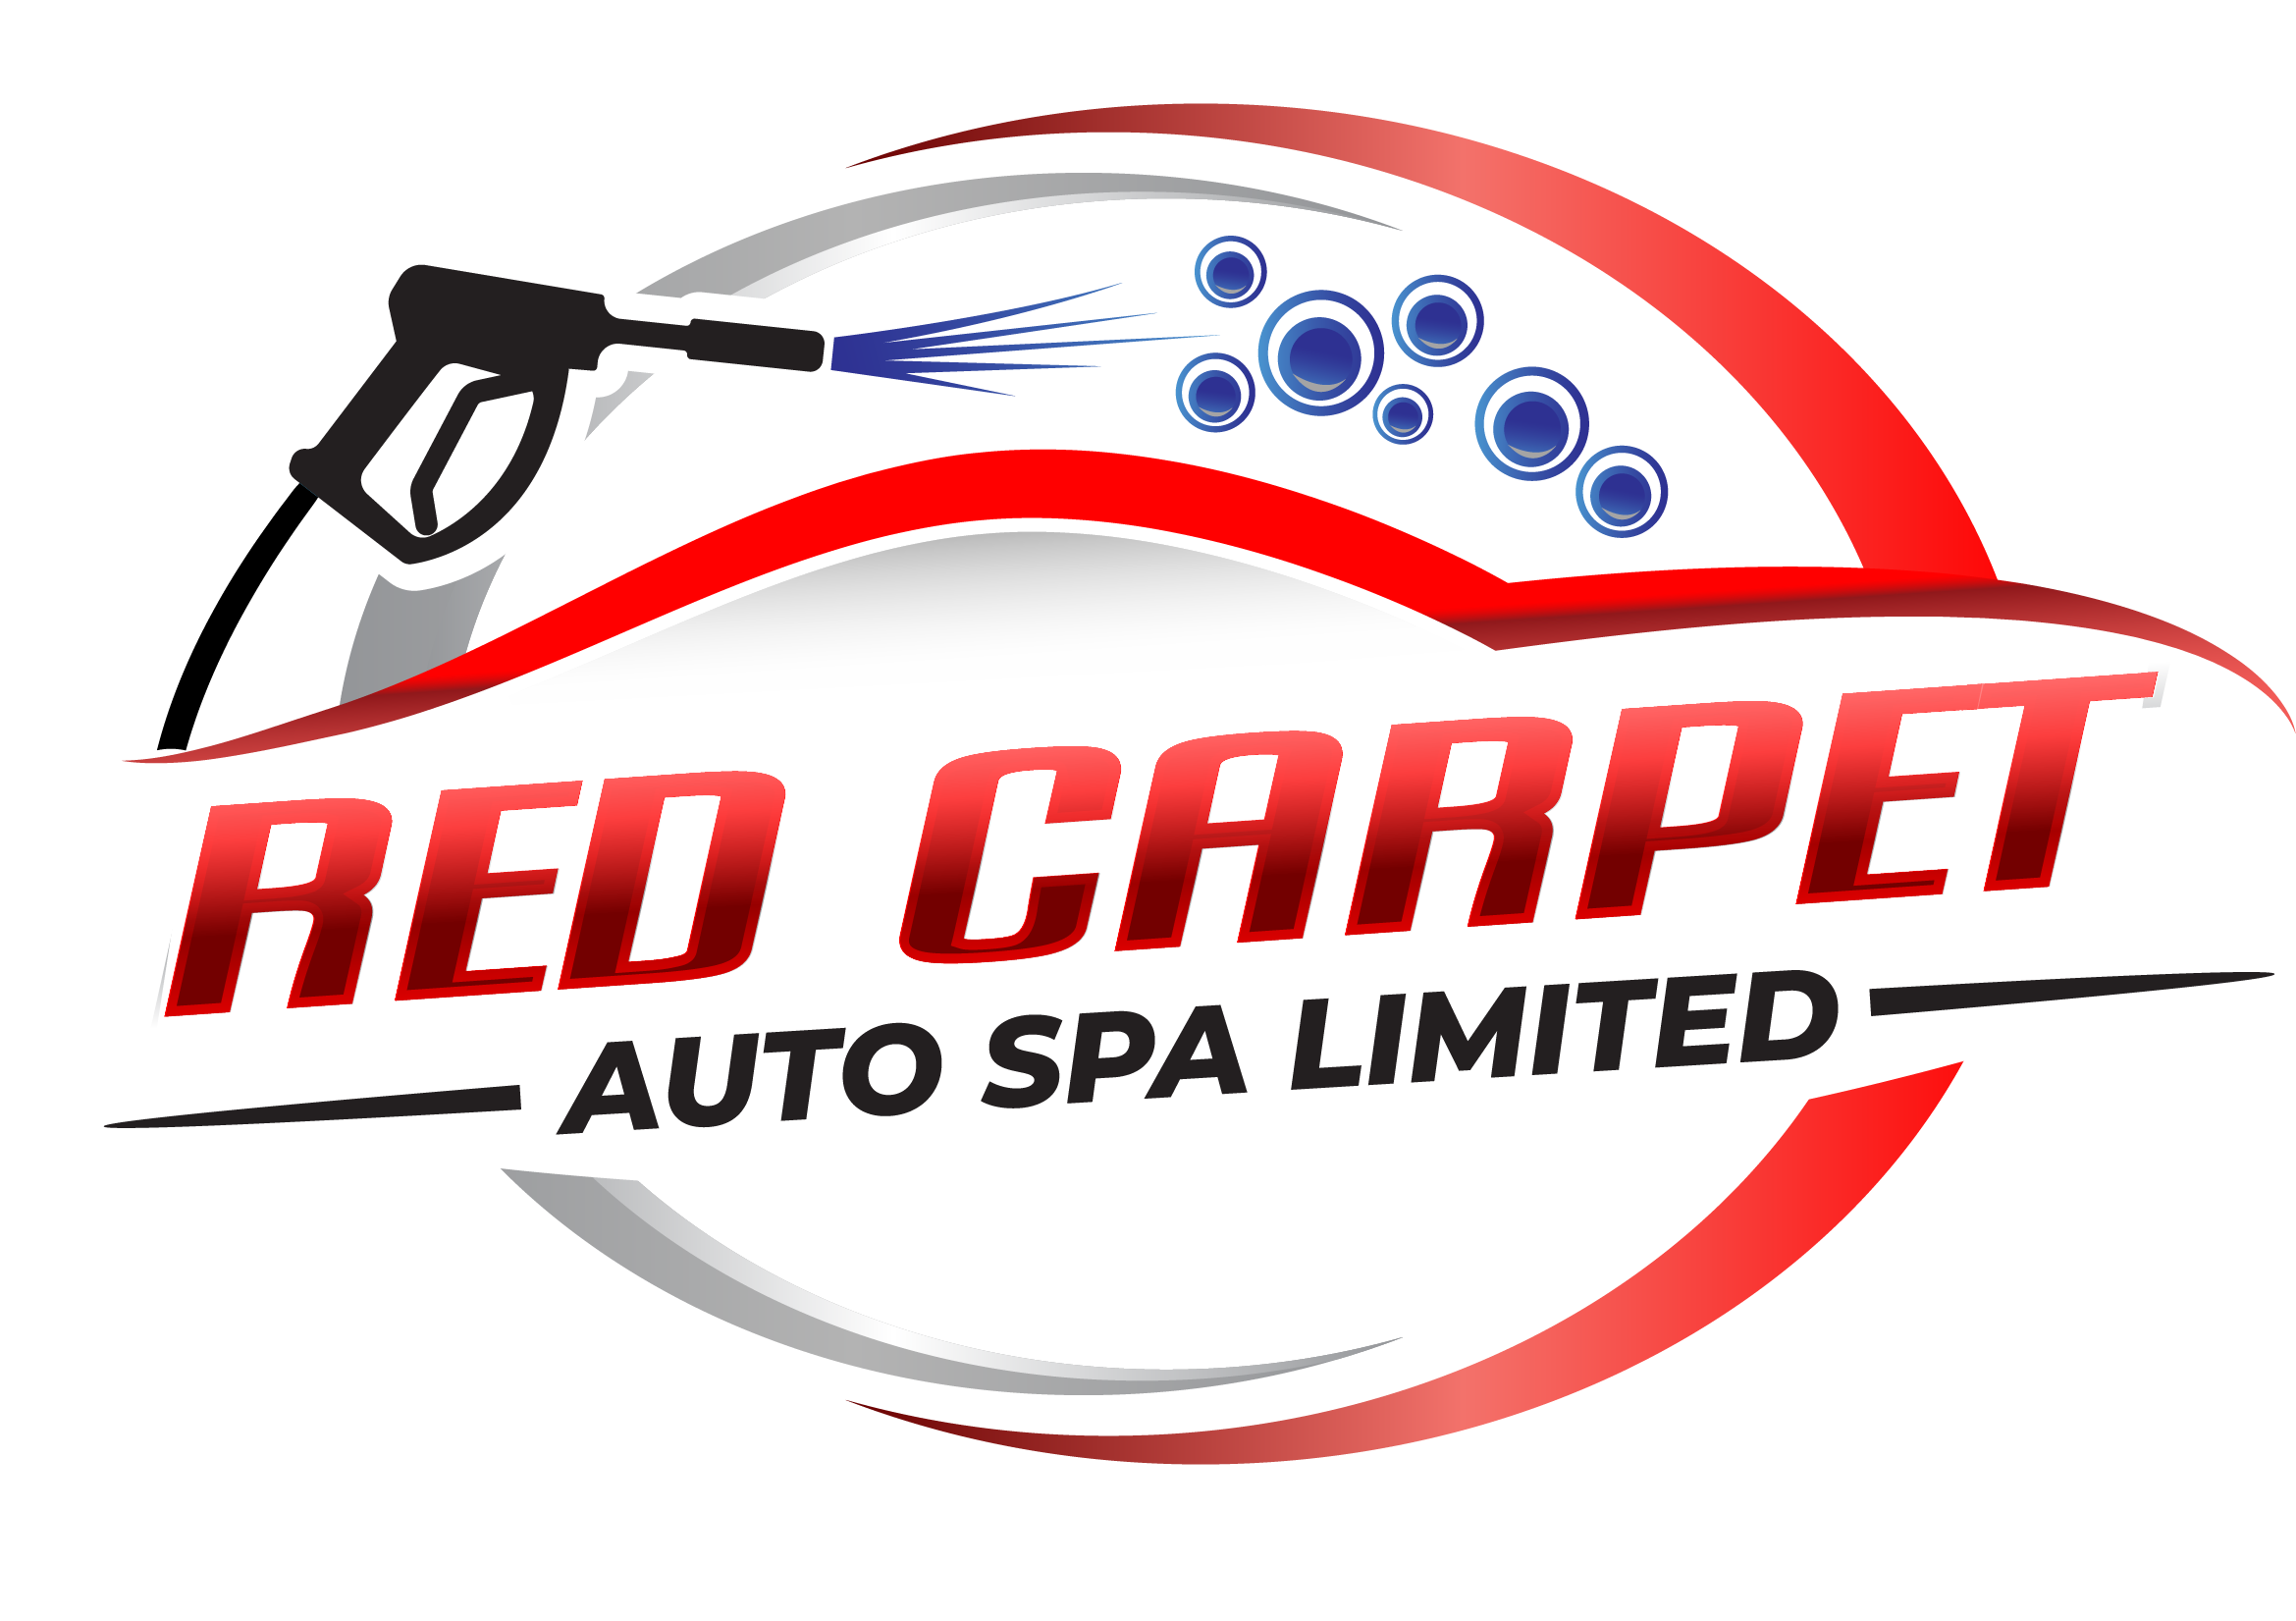 Red Carpet Auto Spa Limited